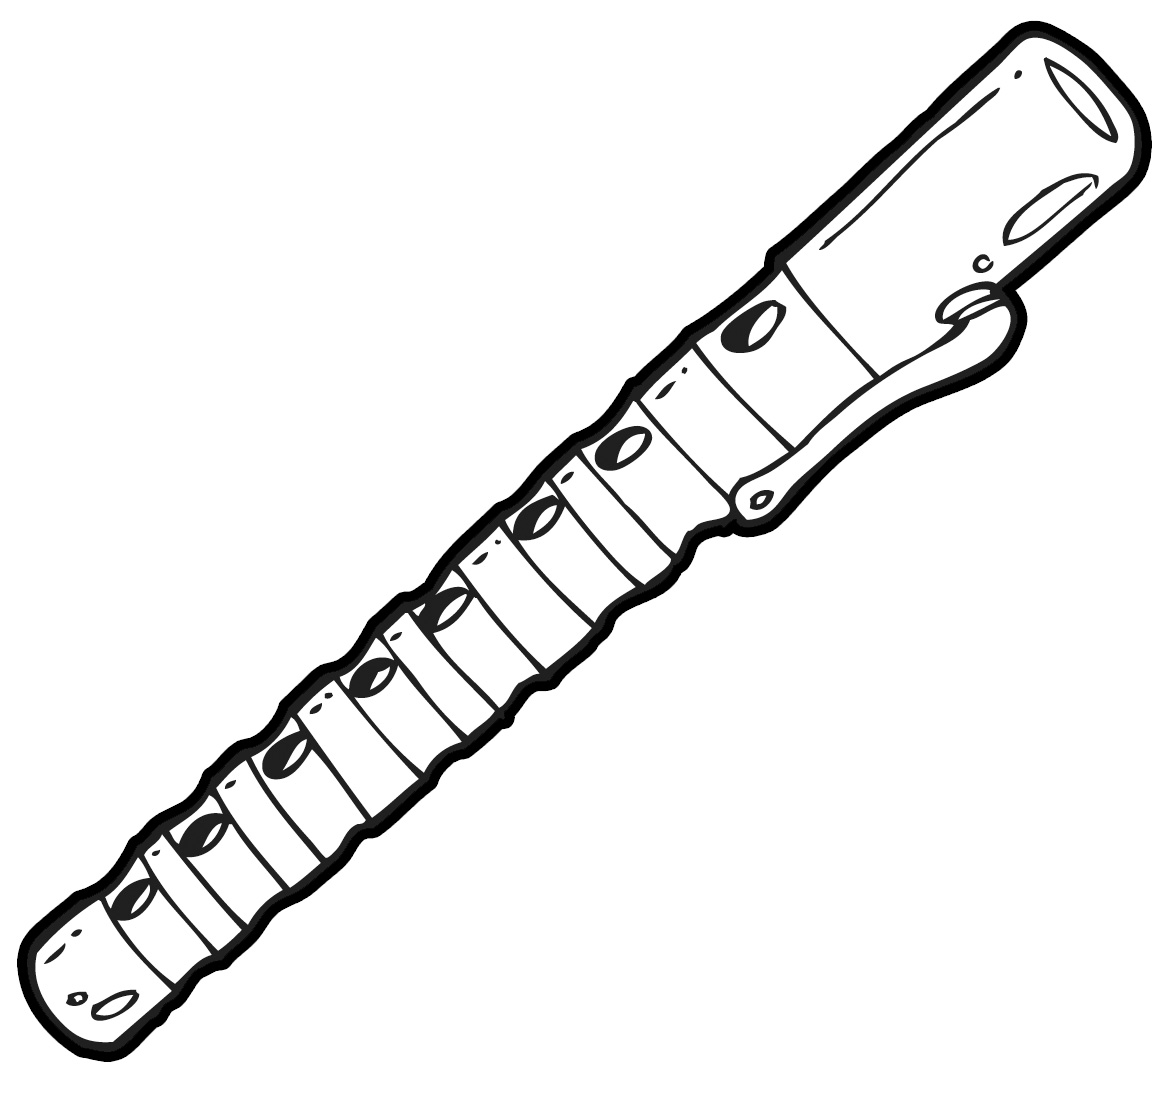 Oboe clipart black and white